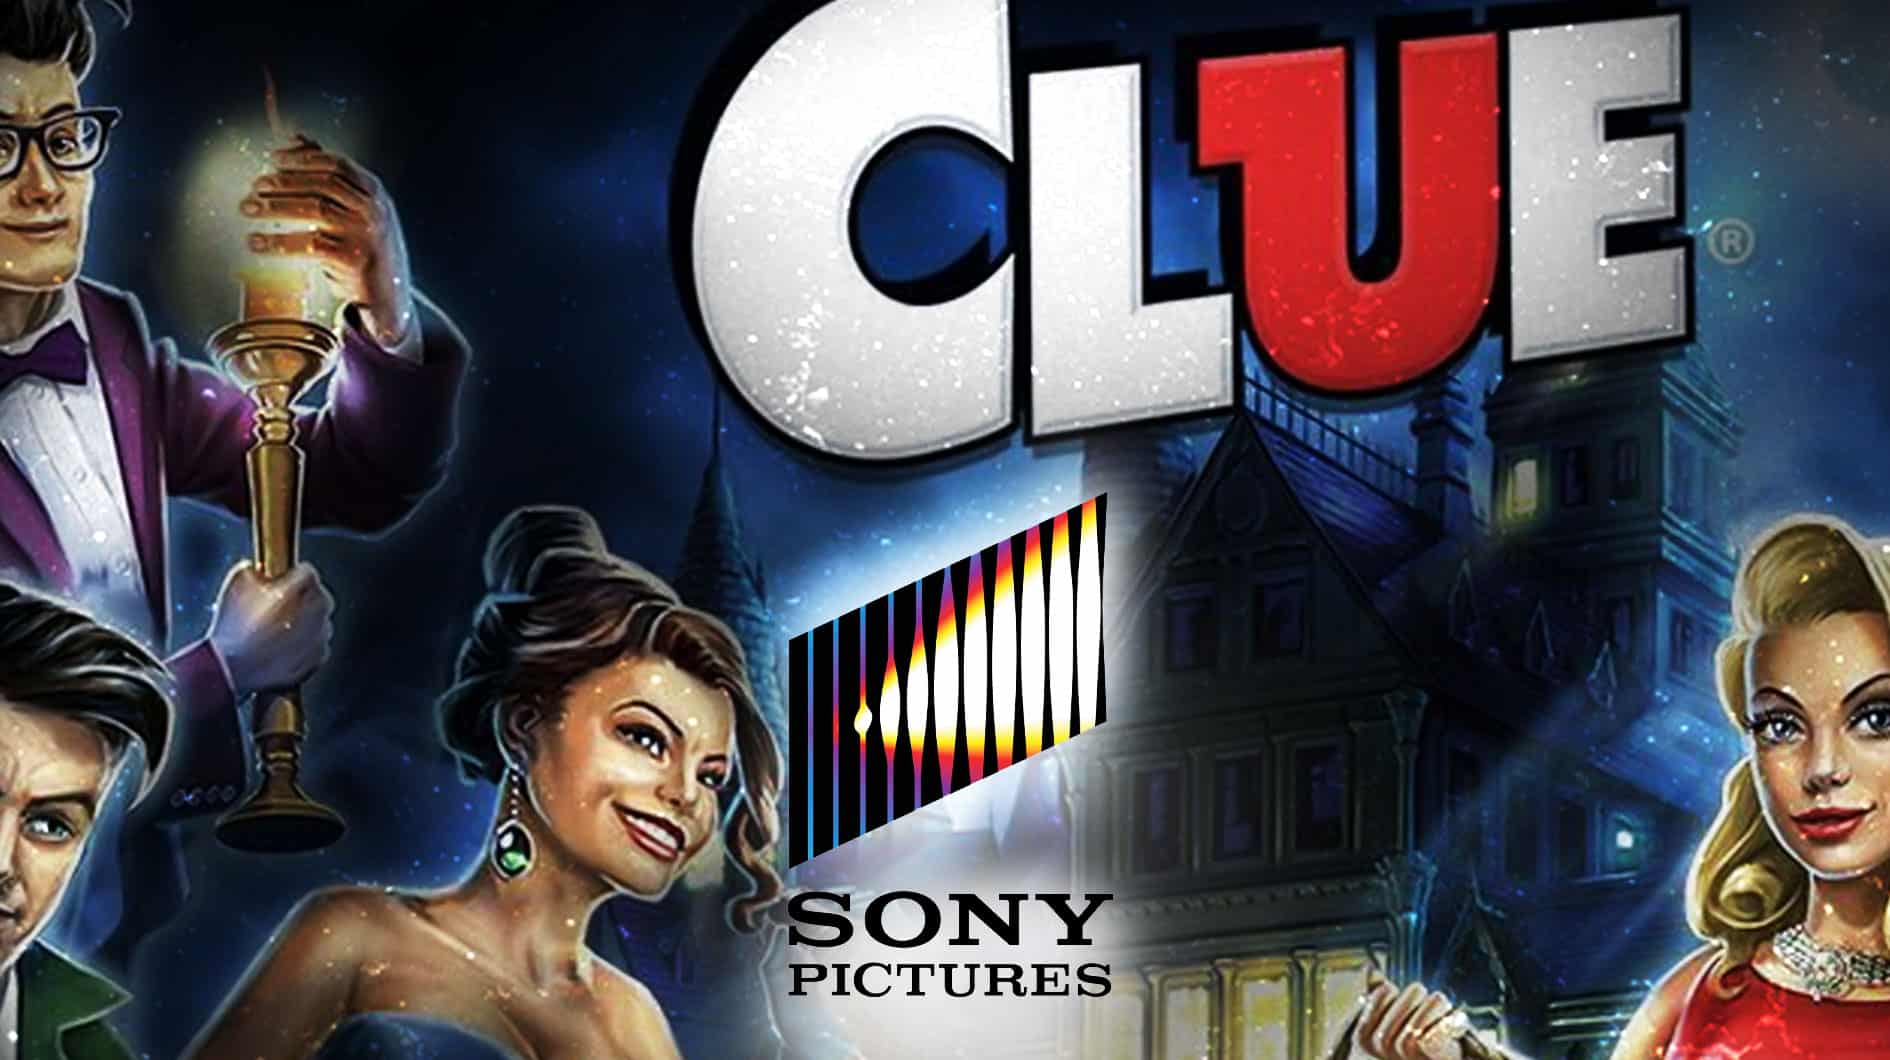 Clue gets massive Sony Pictures update